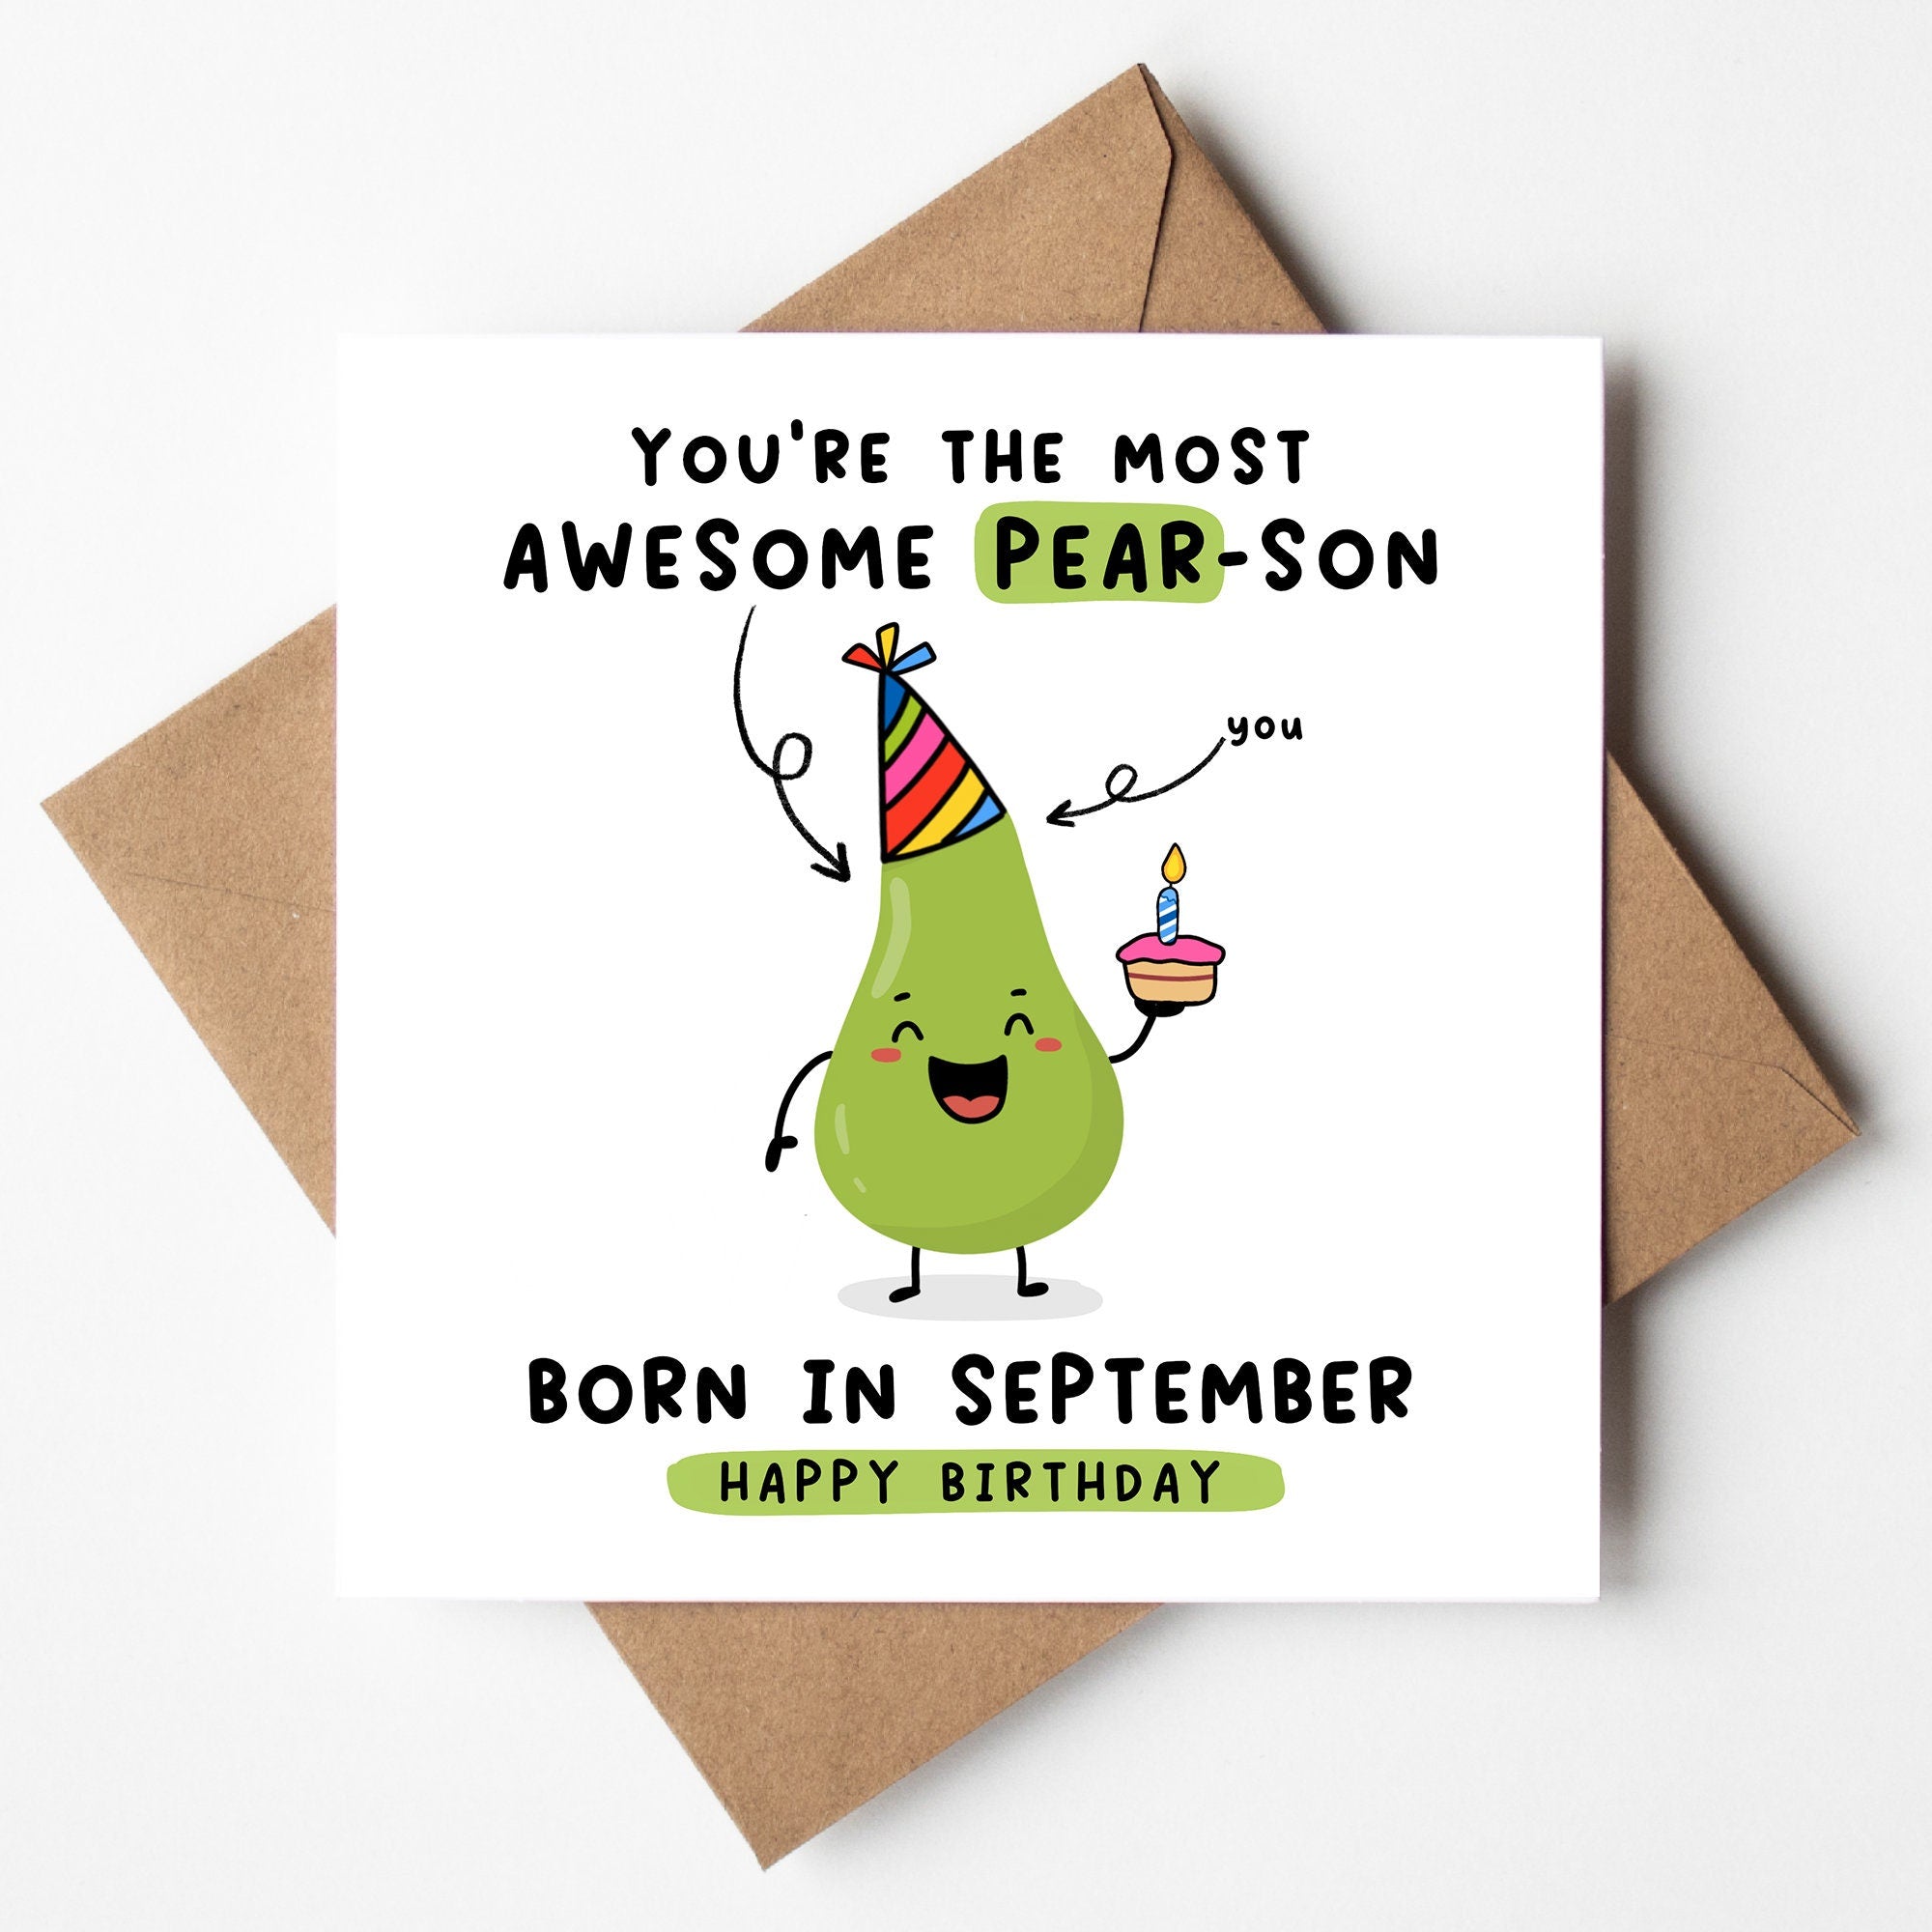 Funny September Birthday Cards - You're The Most Awesome Pear-son born in September